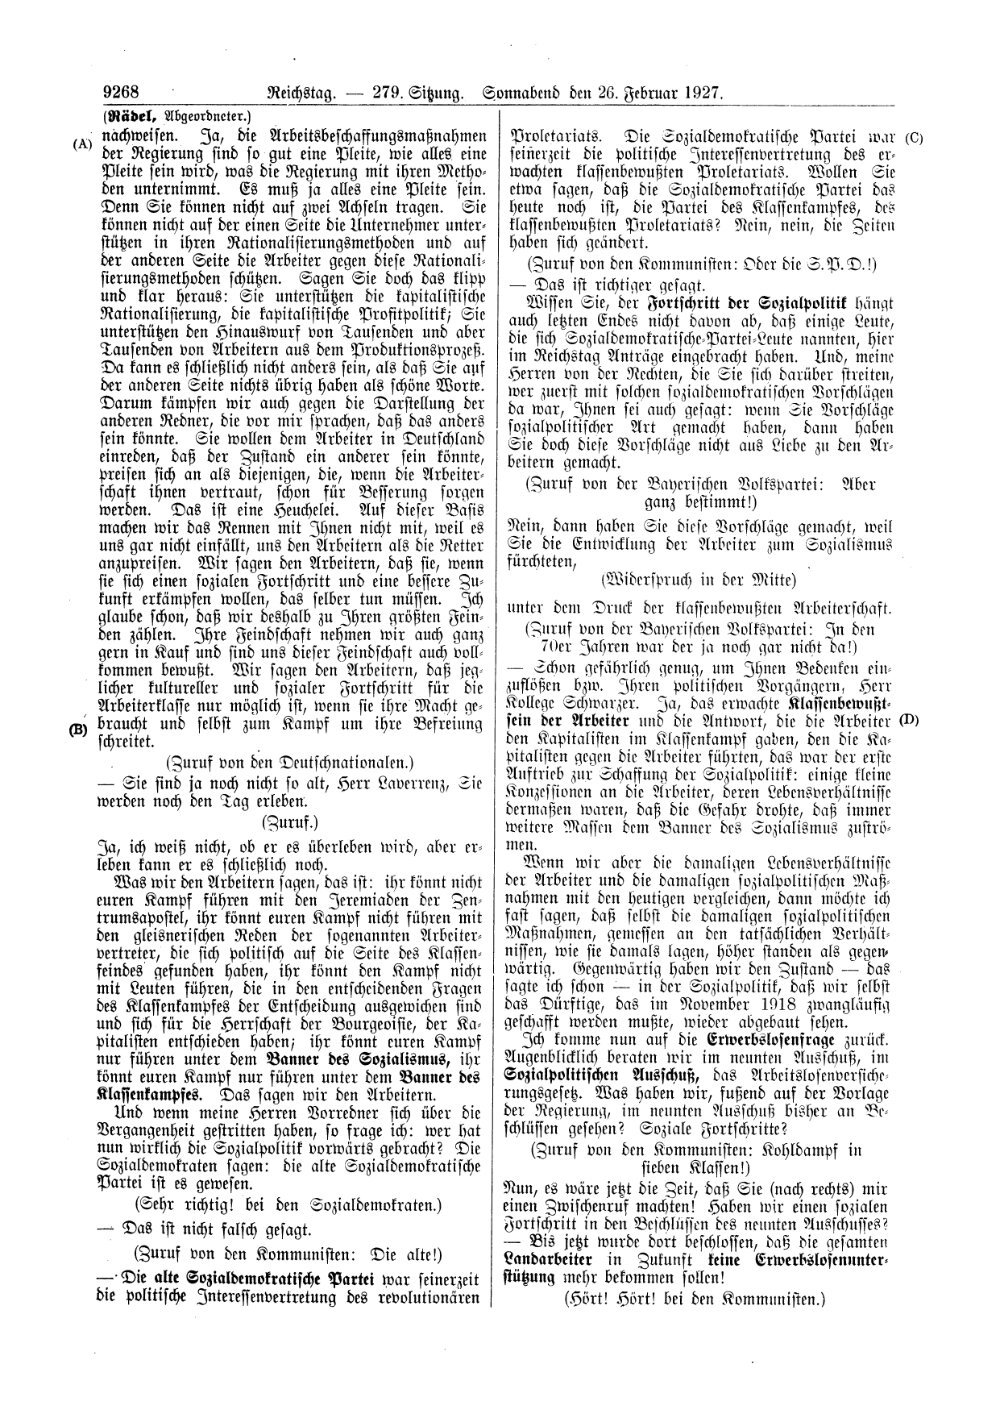 Scan of page 9268